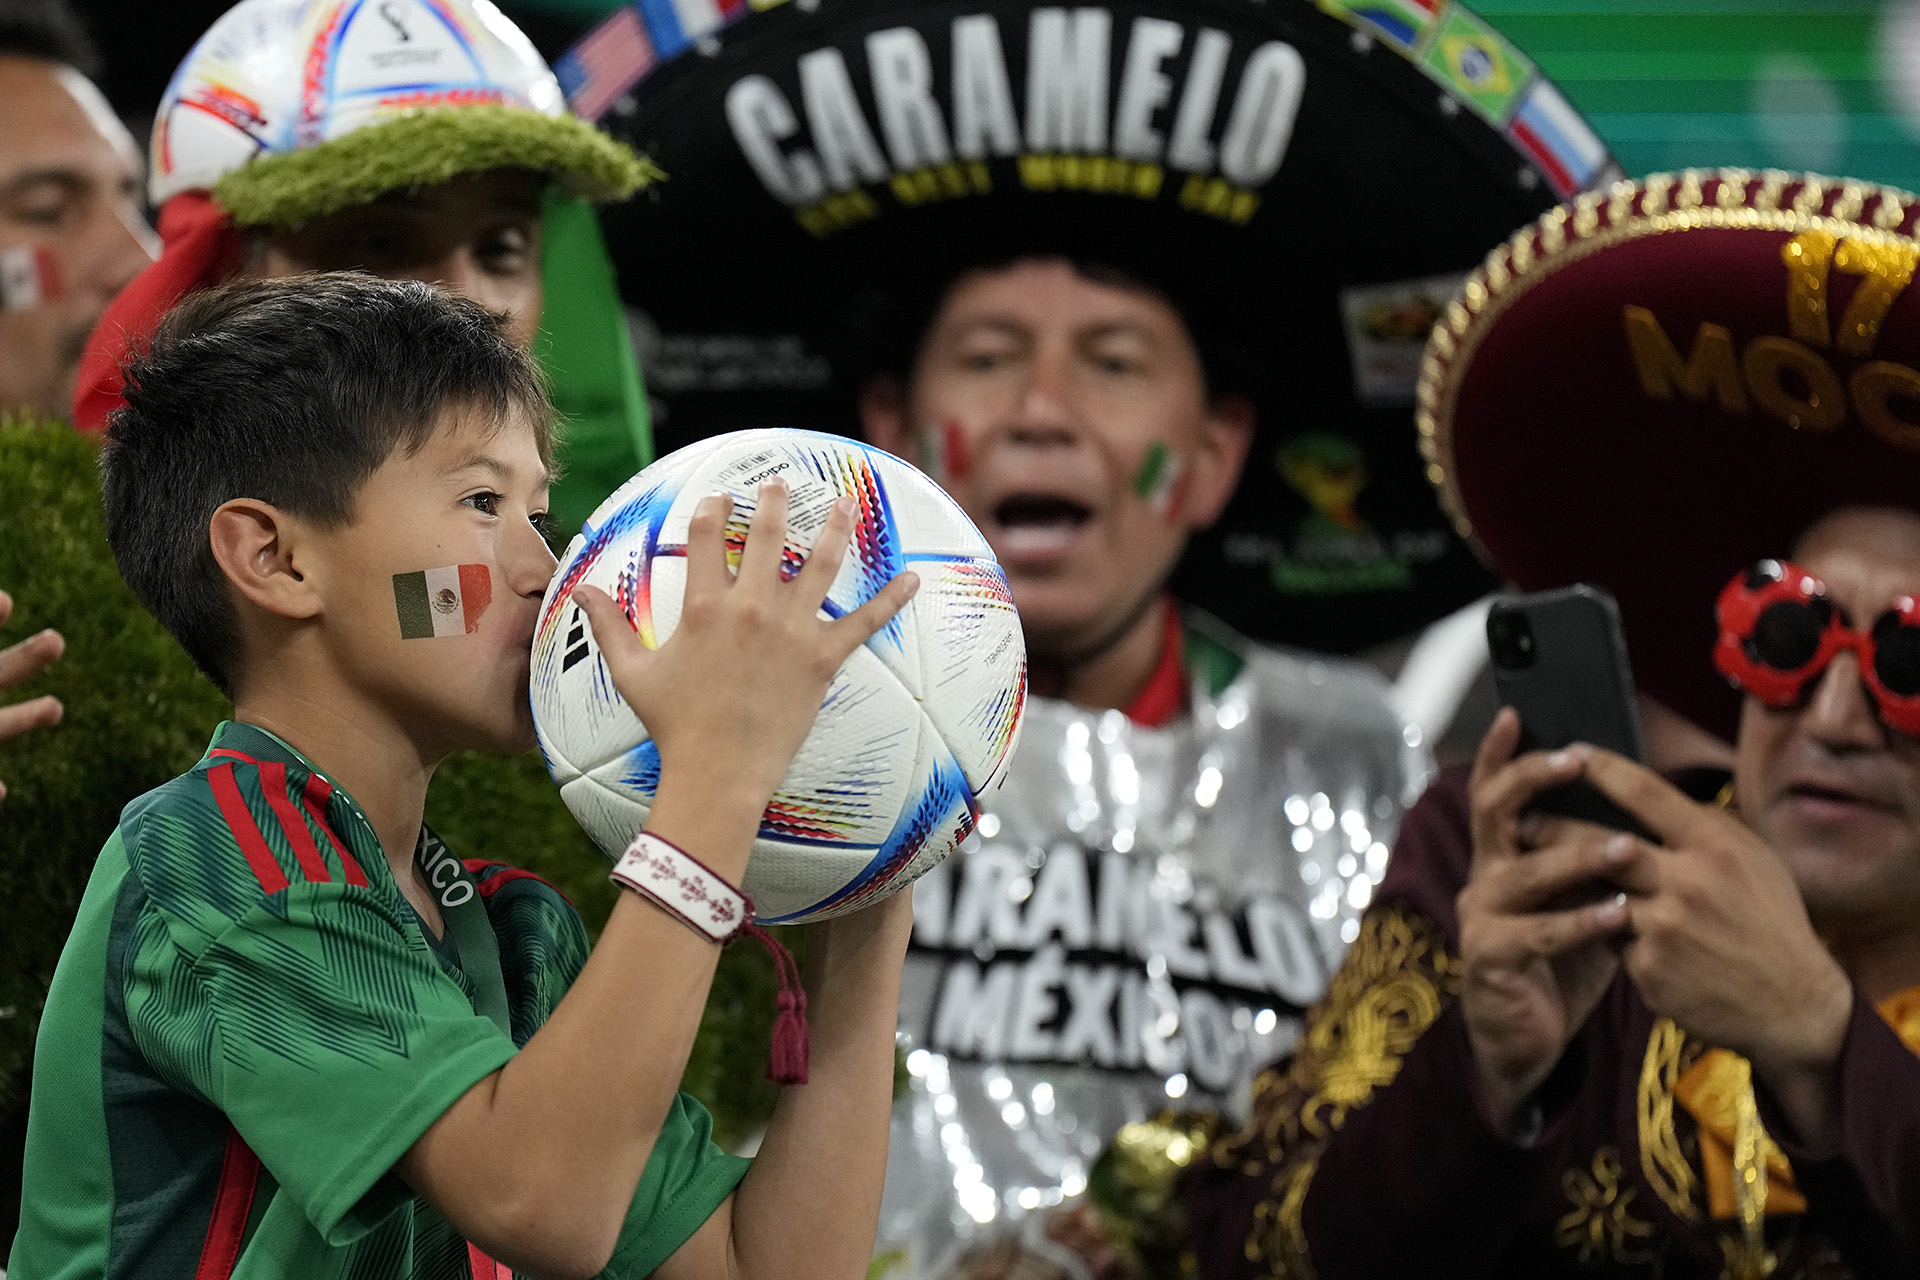 A fan of Mexico kisses a ball during a World Cup group C soccer match against Poland at the Stadium 974 in Doha, Qatar, Tuesday, Nov. 22, 2022. (AP Photo/Martin Meissner)